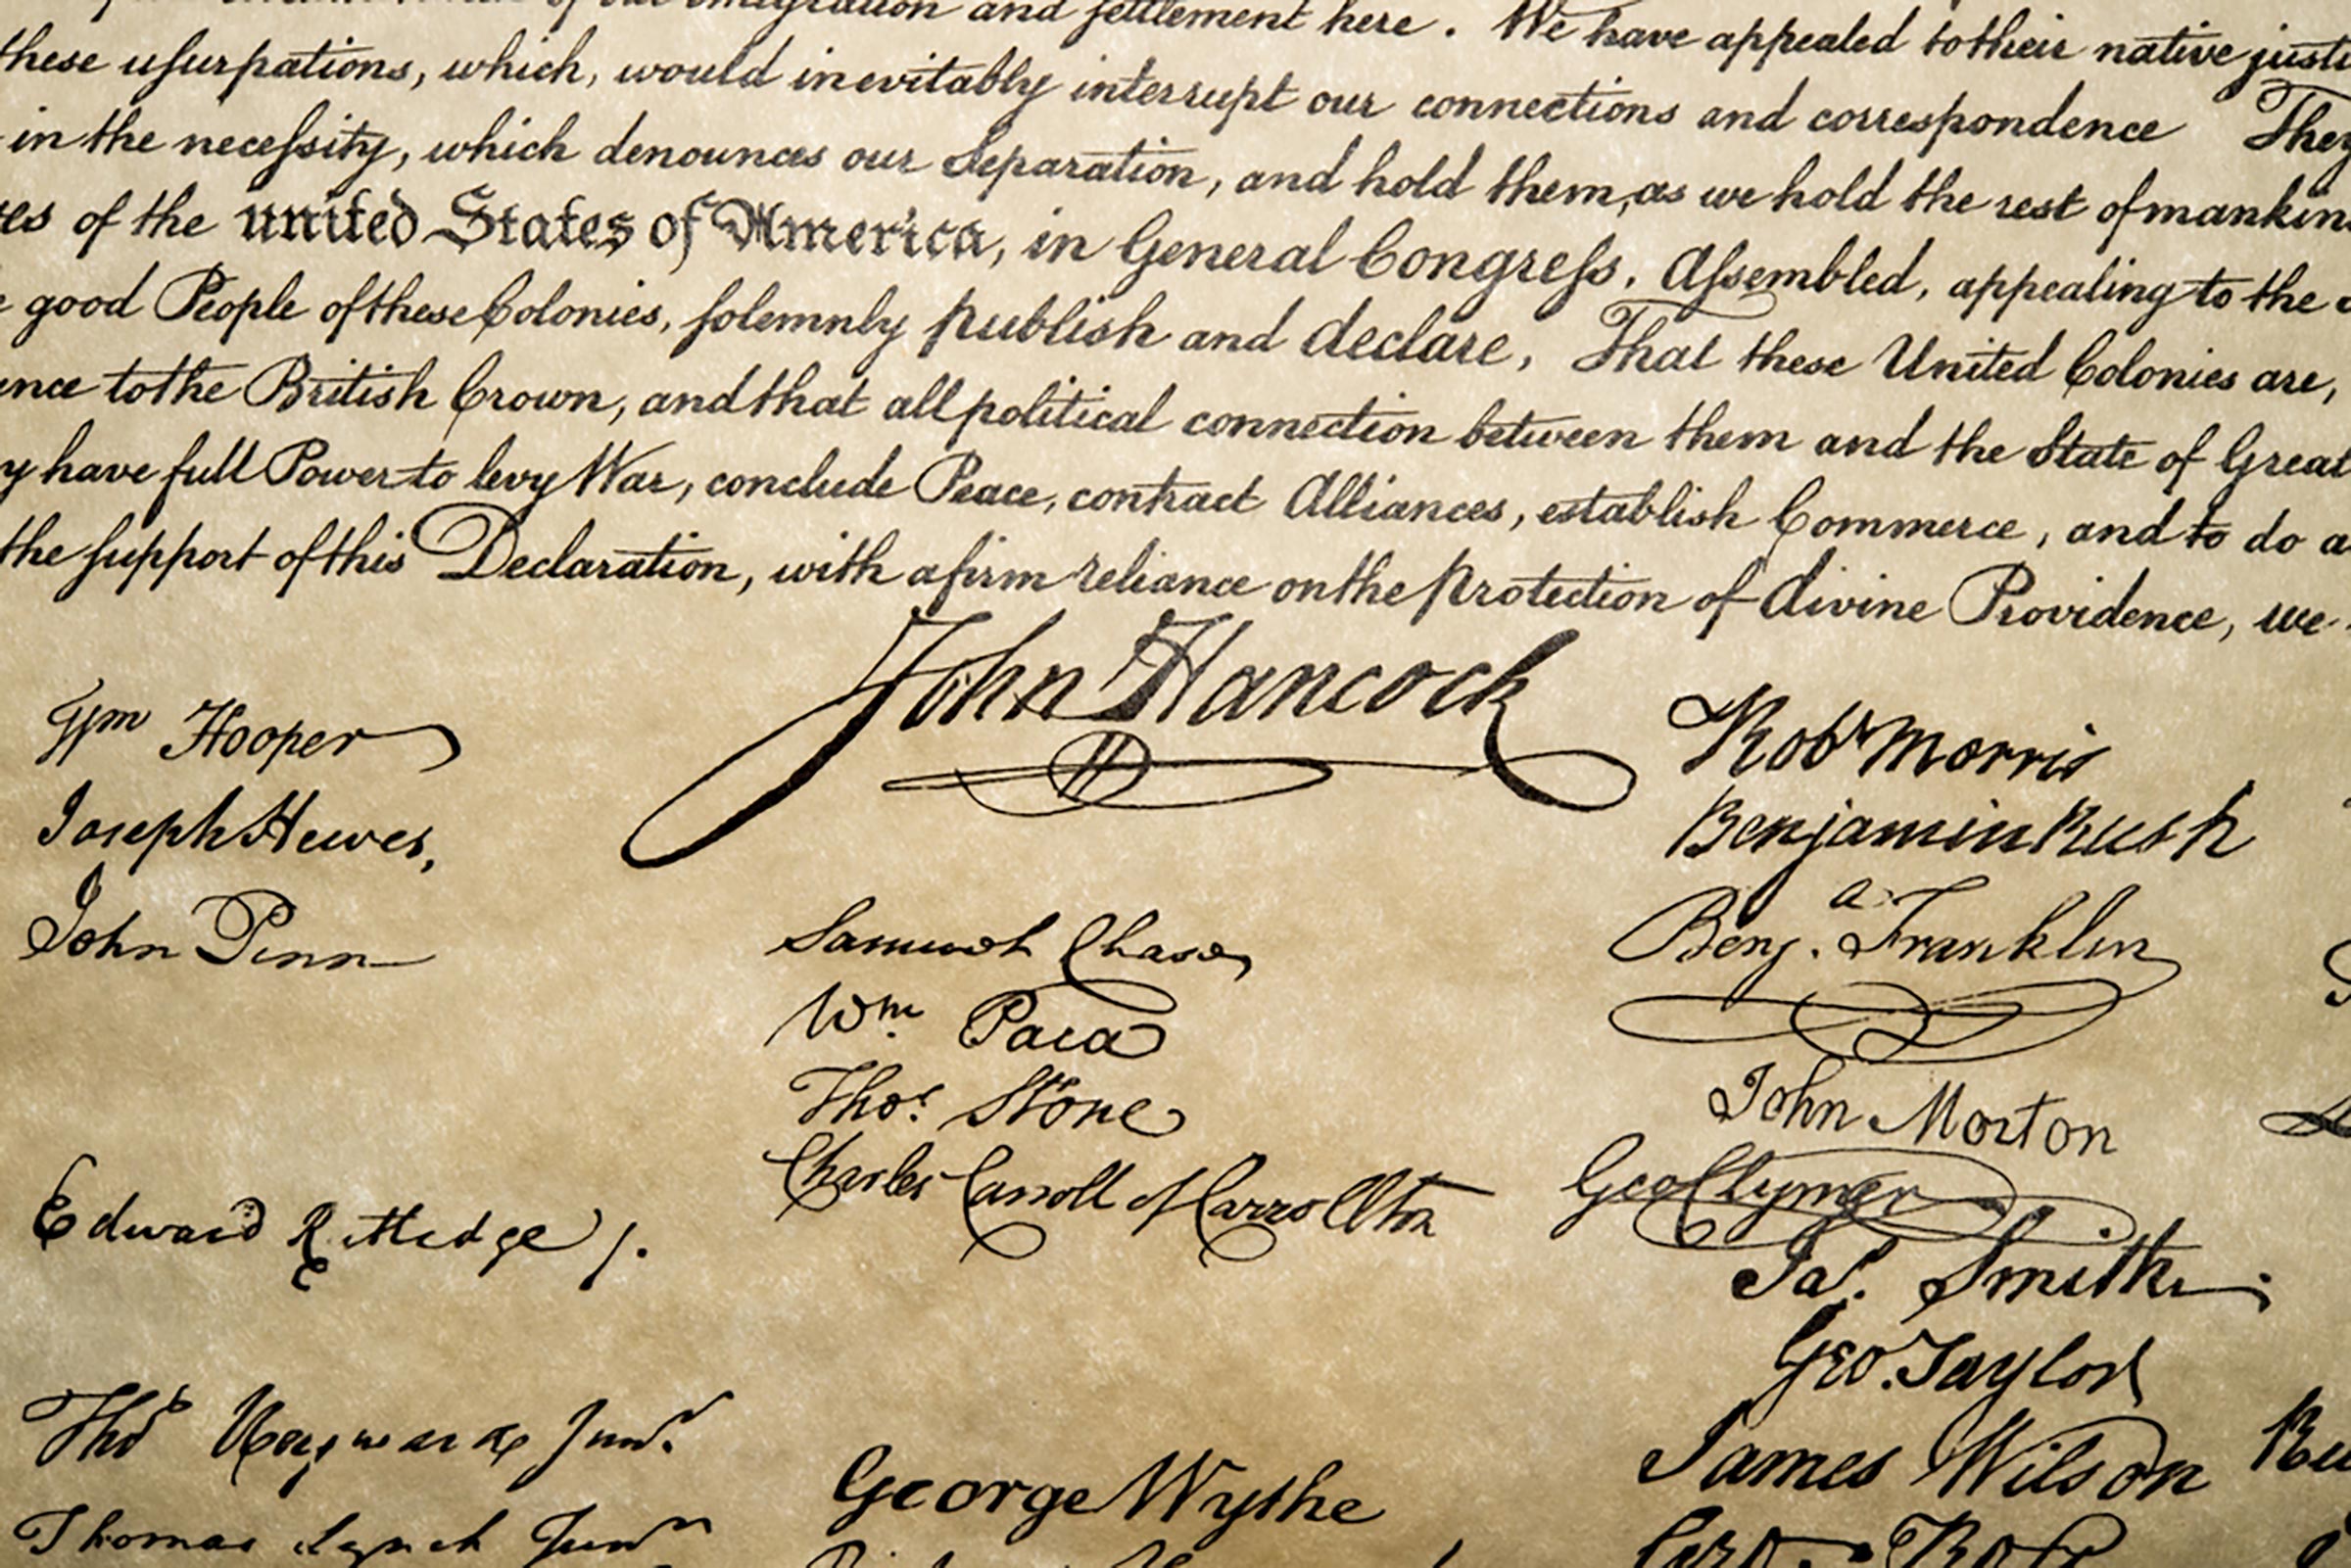 antithesis examples in the declaration of independence